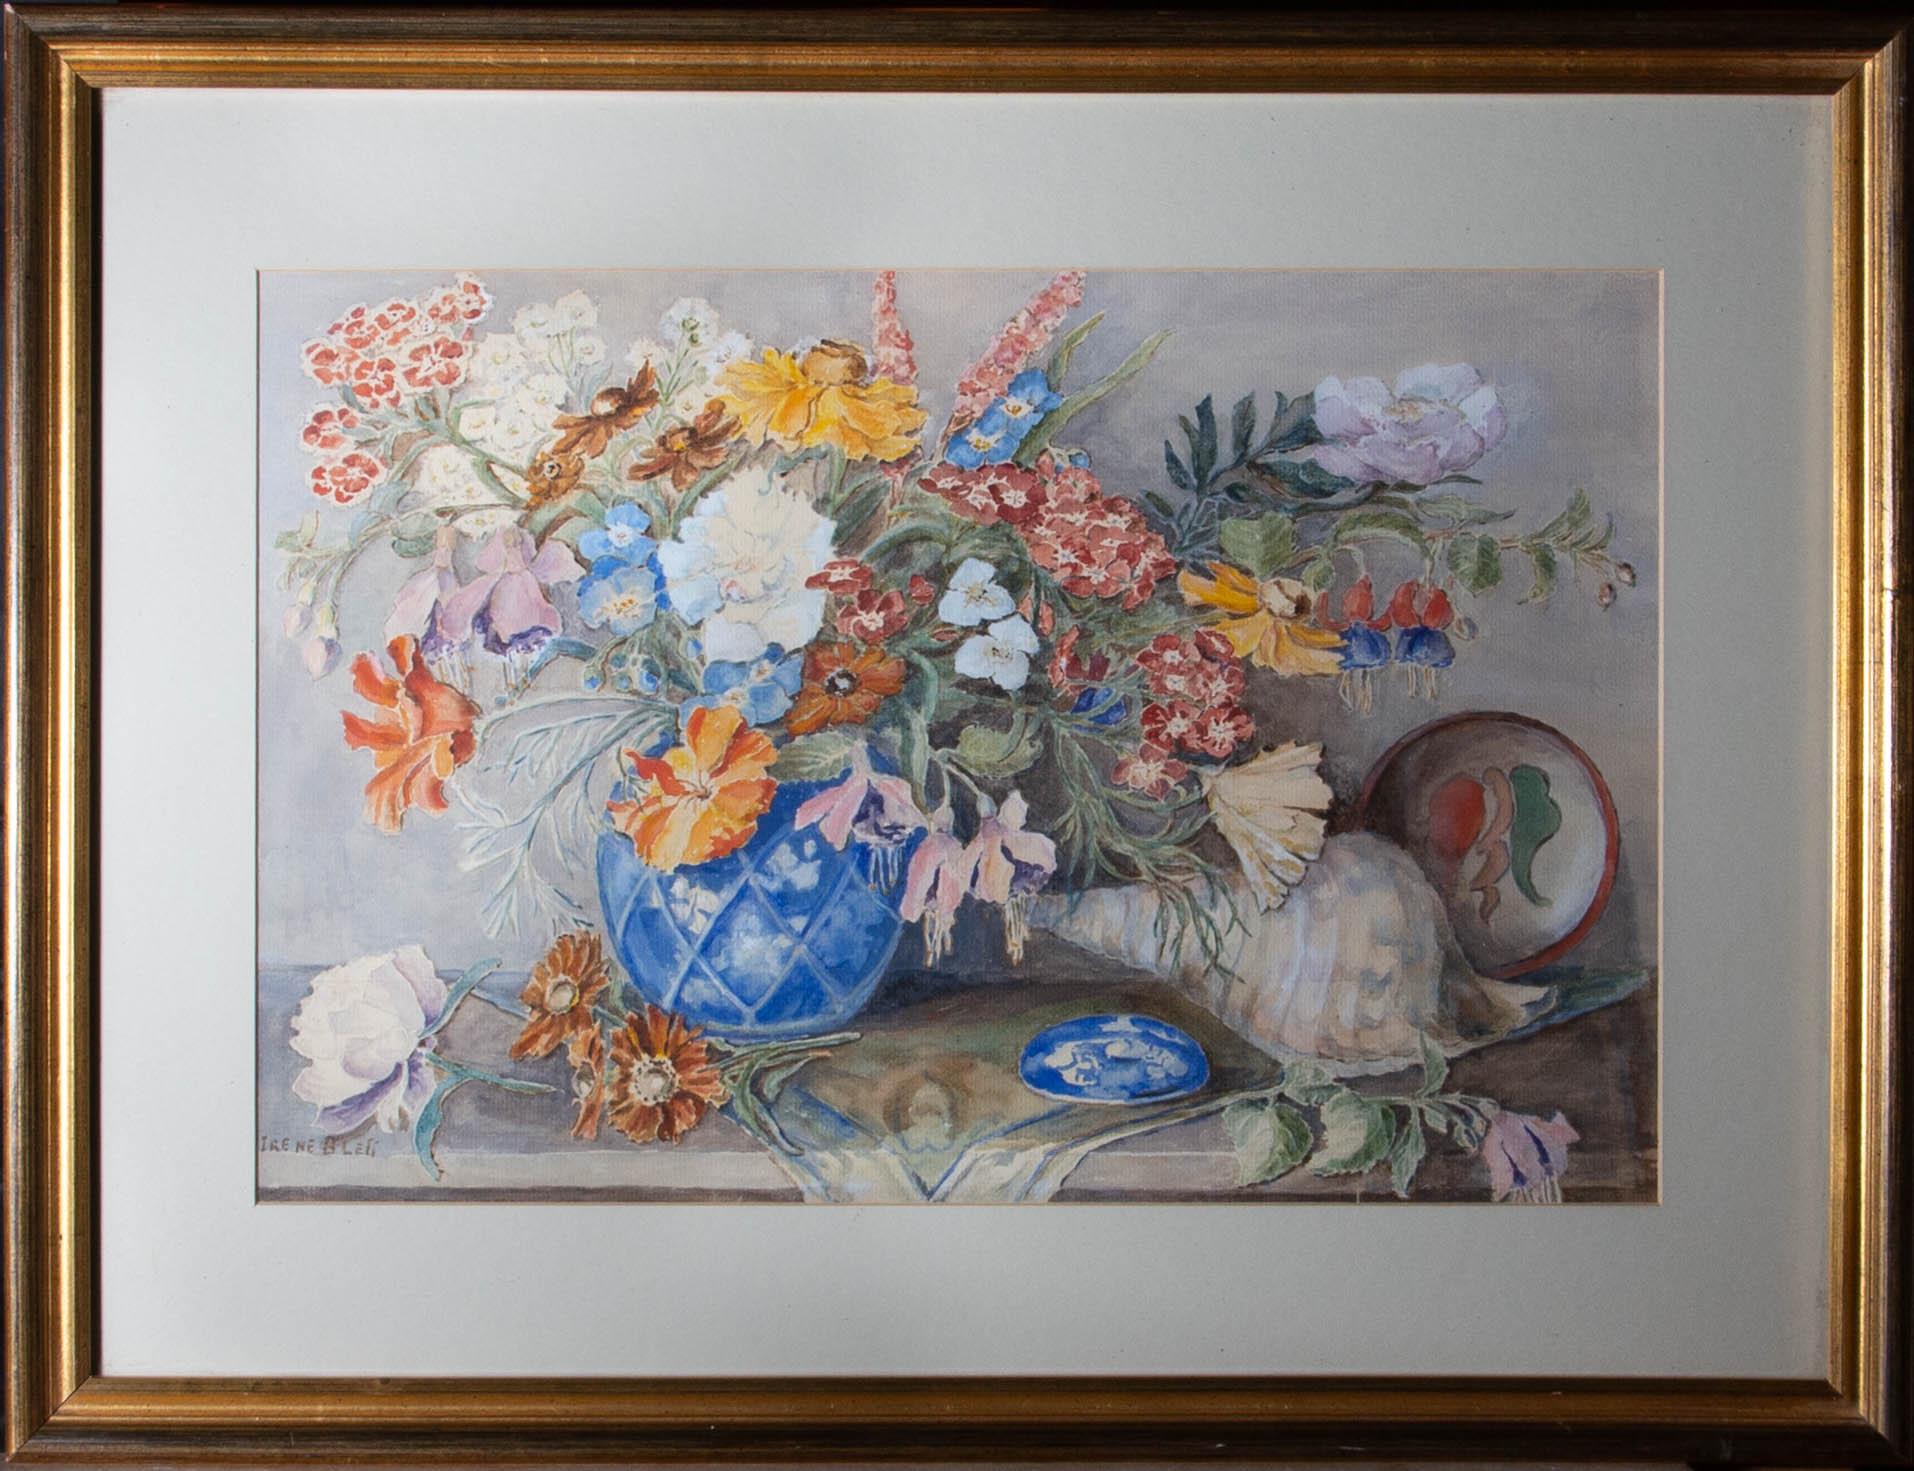 A joyful and vibrant floral study showing a ginger jar, with its top next to it, filled with gorgeously bright blooms, including fuchsias, peonies, sweet William, auricula, periwinkles and many more. The artist has signed to the lower left corner